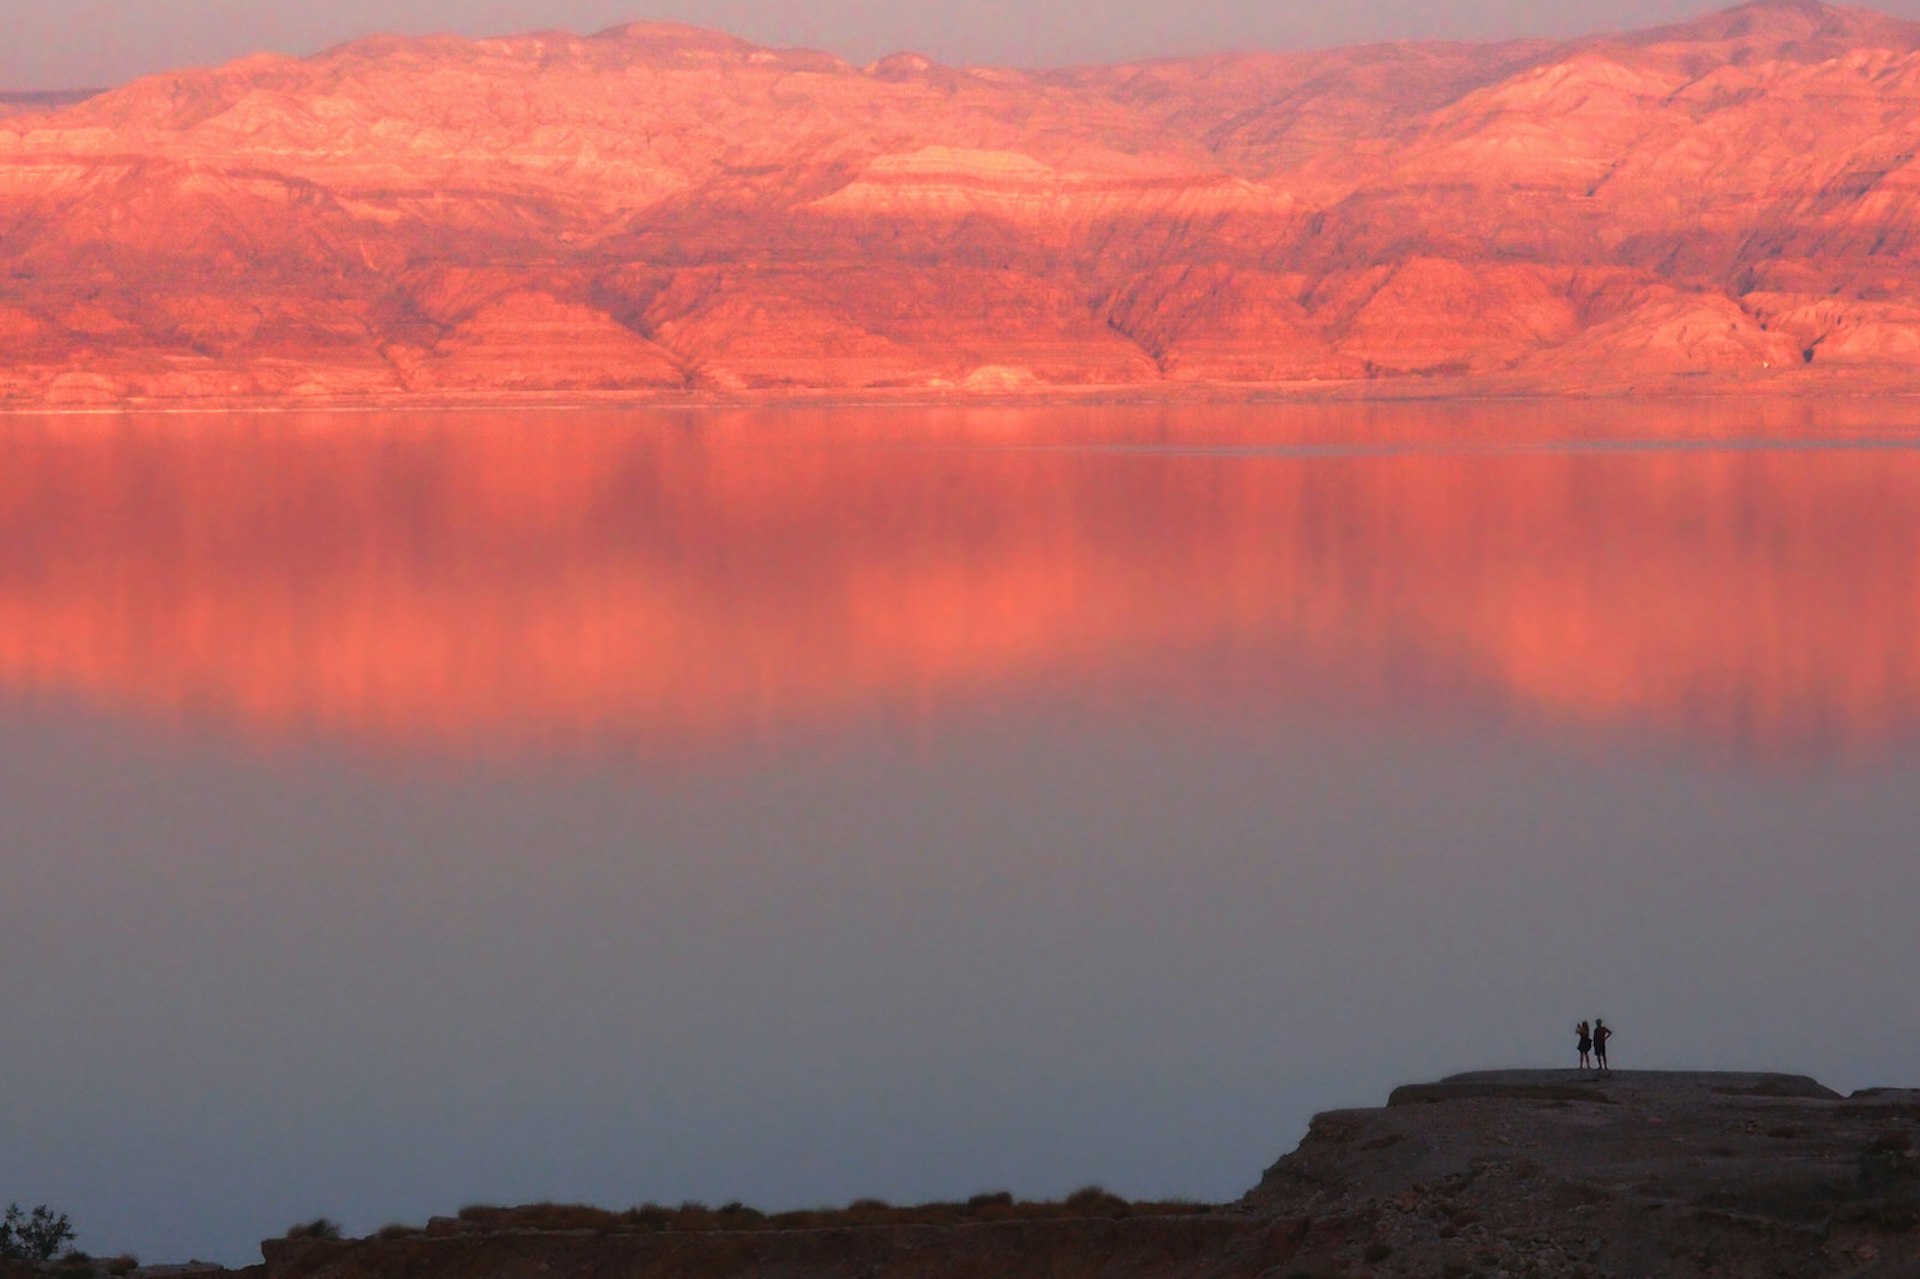 The Dead Sea glowing orange in the sunset, with the outline of two figures visible on the nearest bank © GMa / Shutterstock